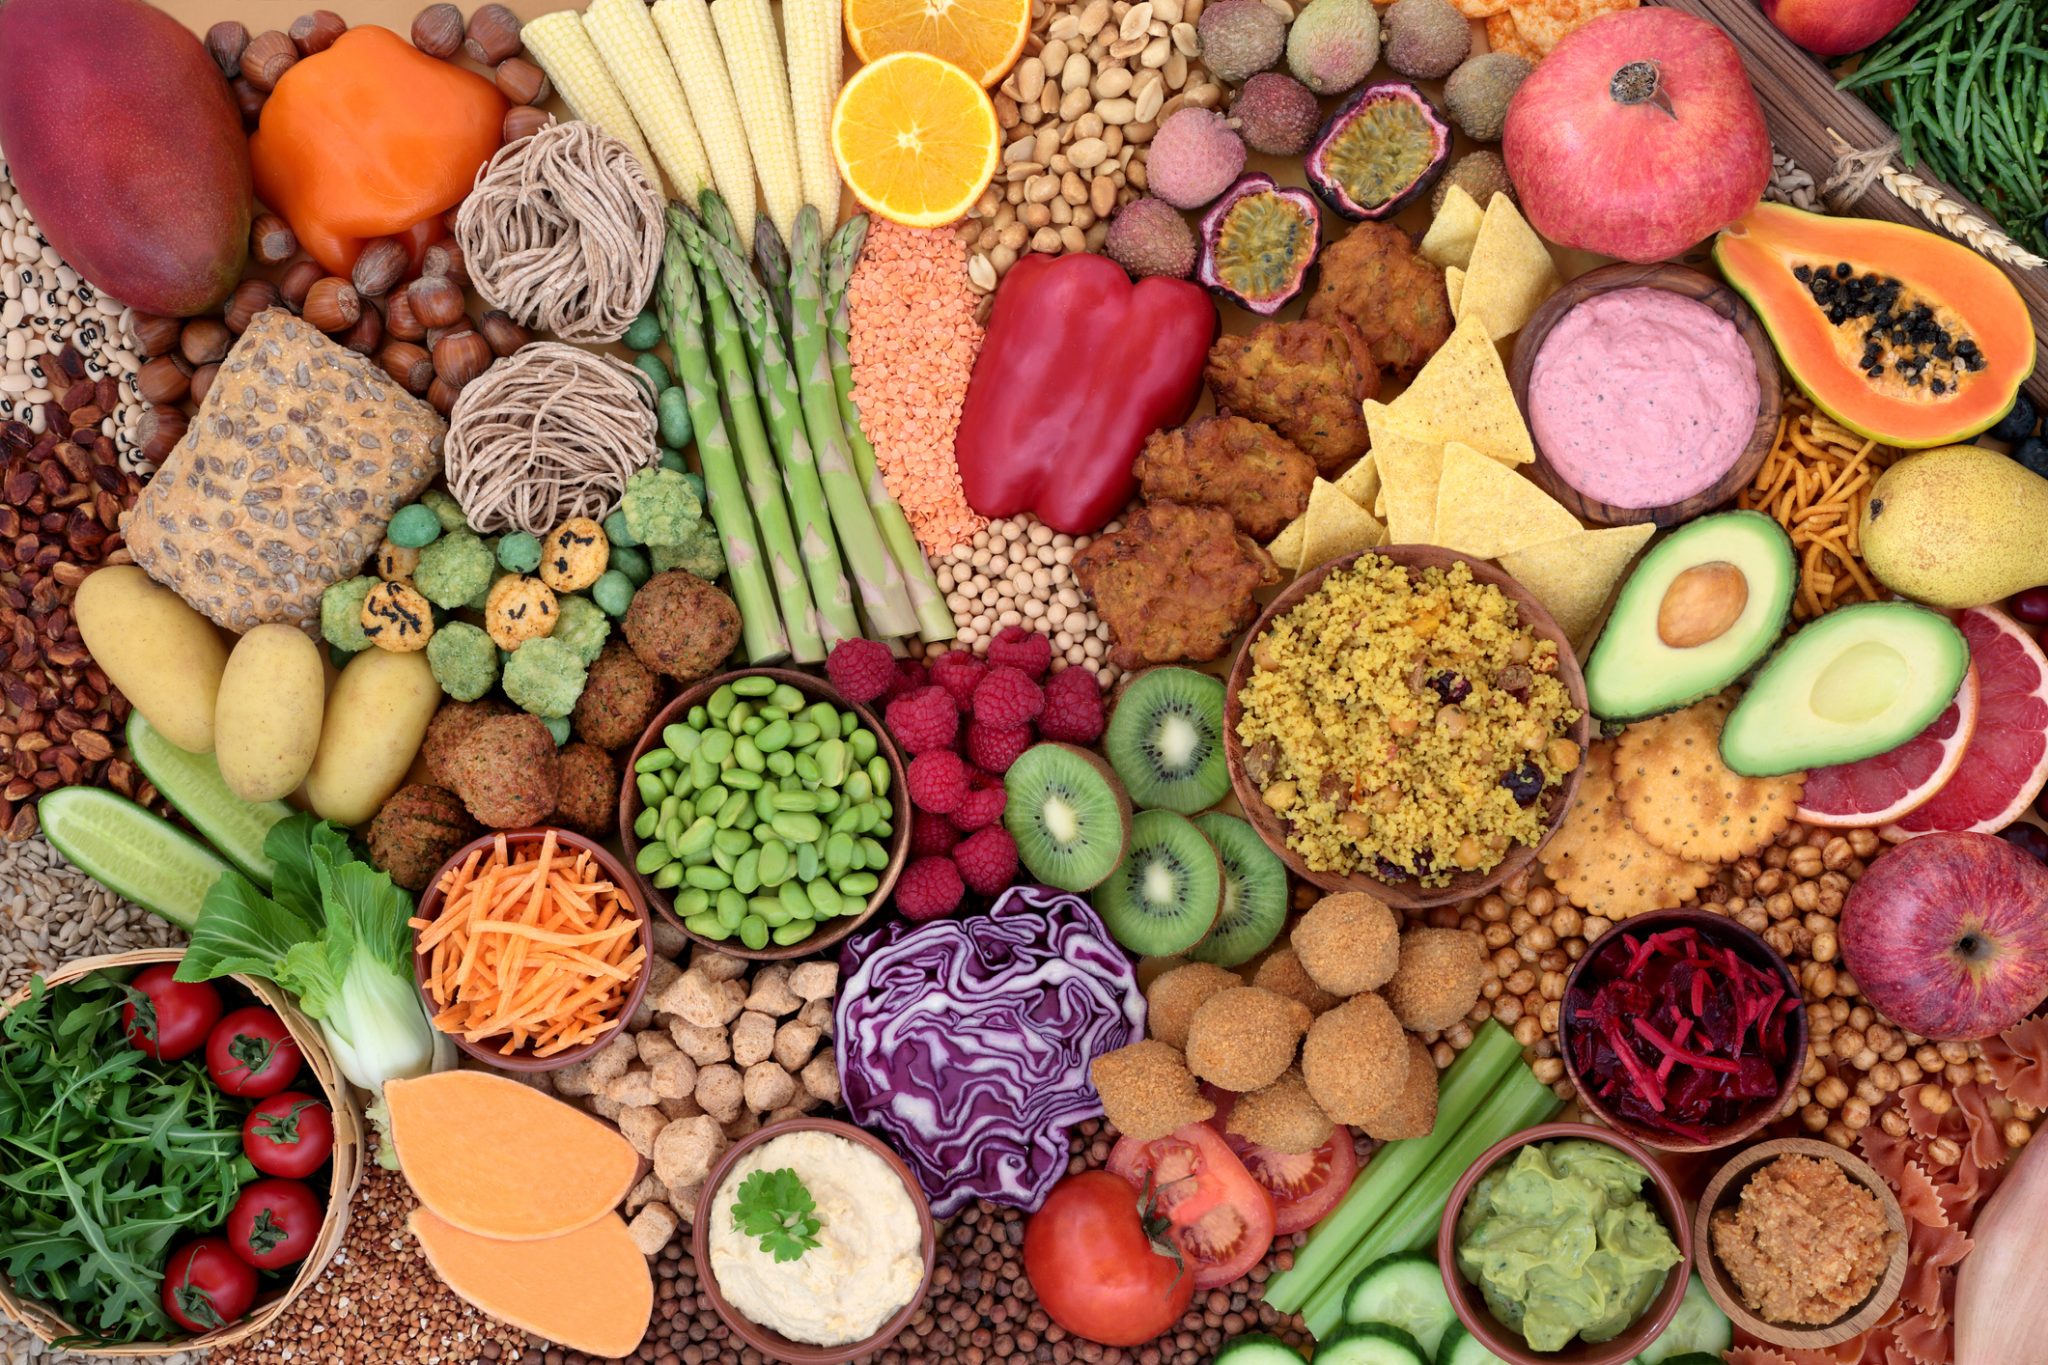 Selection of fruits, vegetables and grains